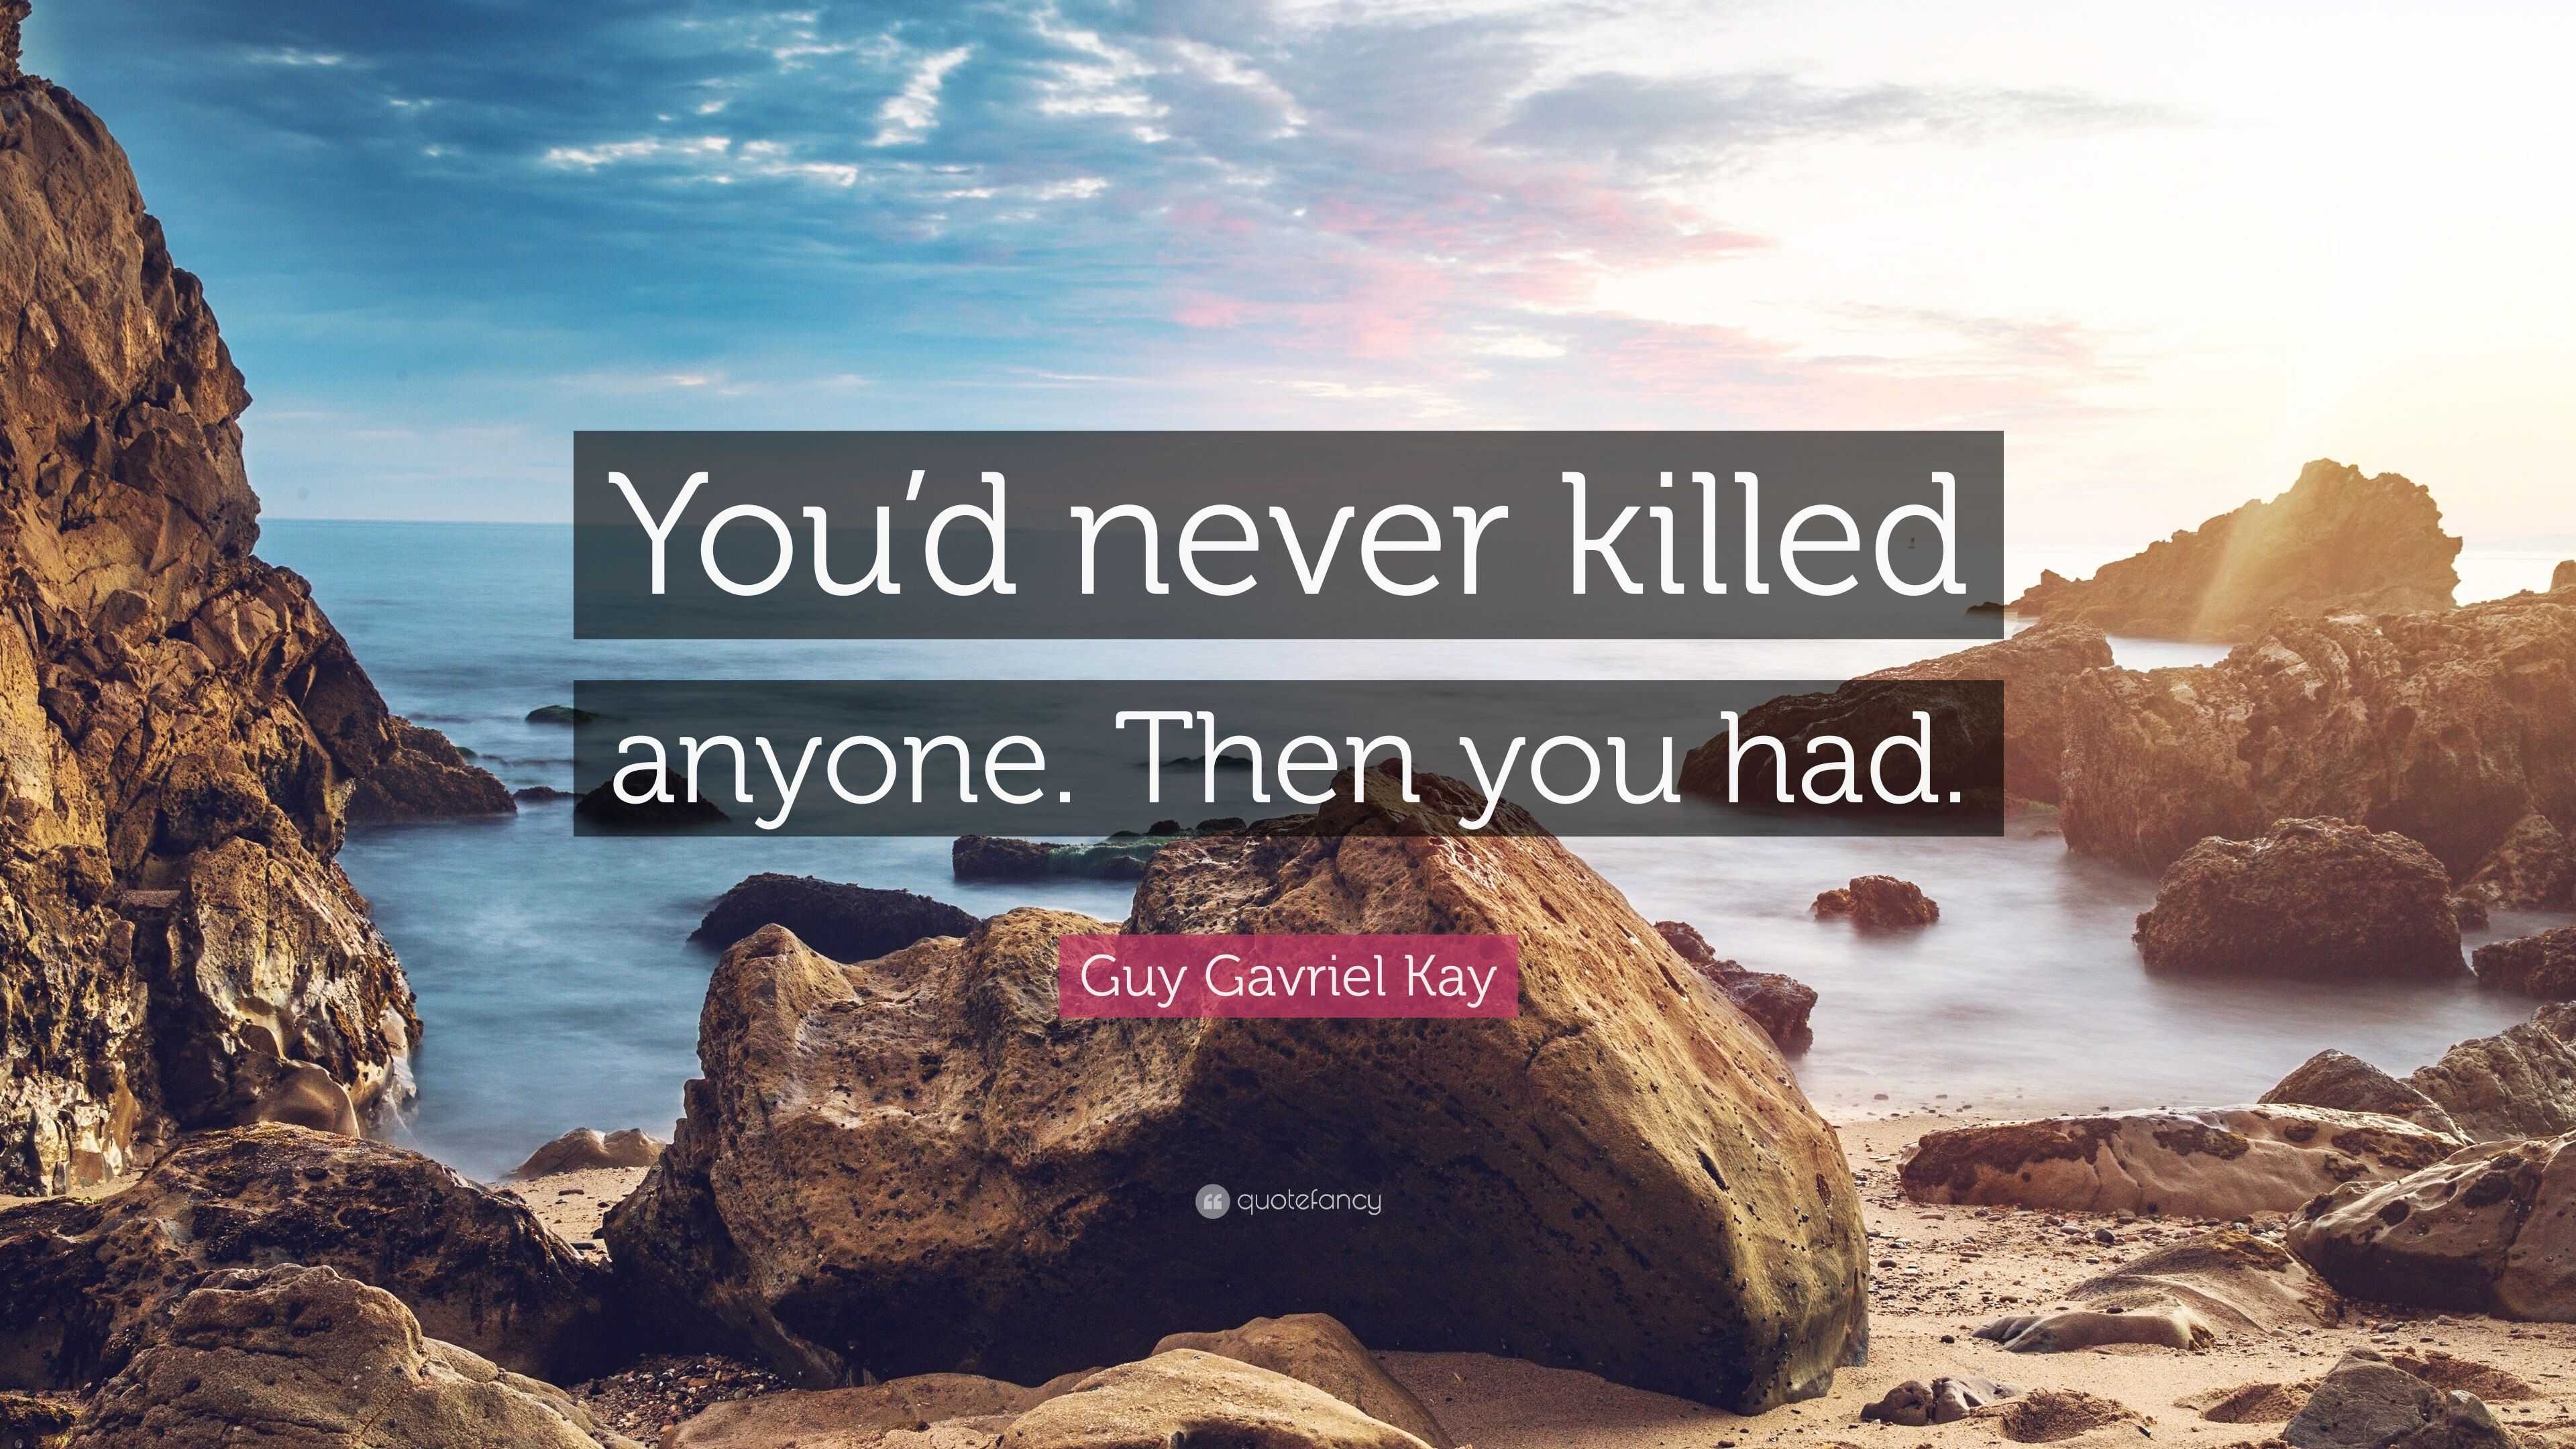 Guy Gavriel Kay Quote: “You’d never killed anyone. Then you had.”